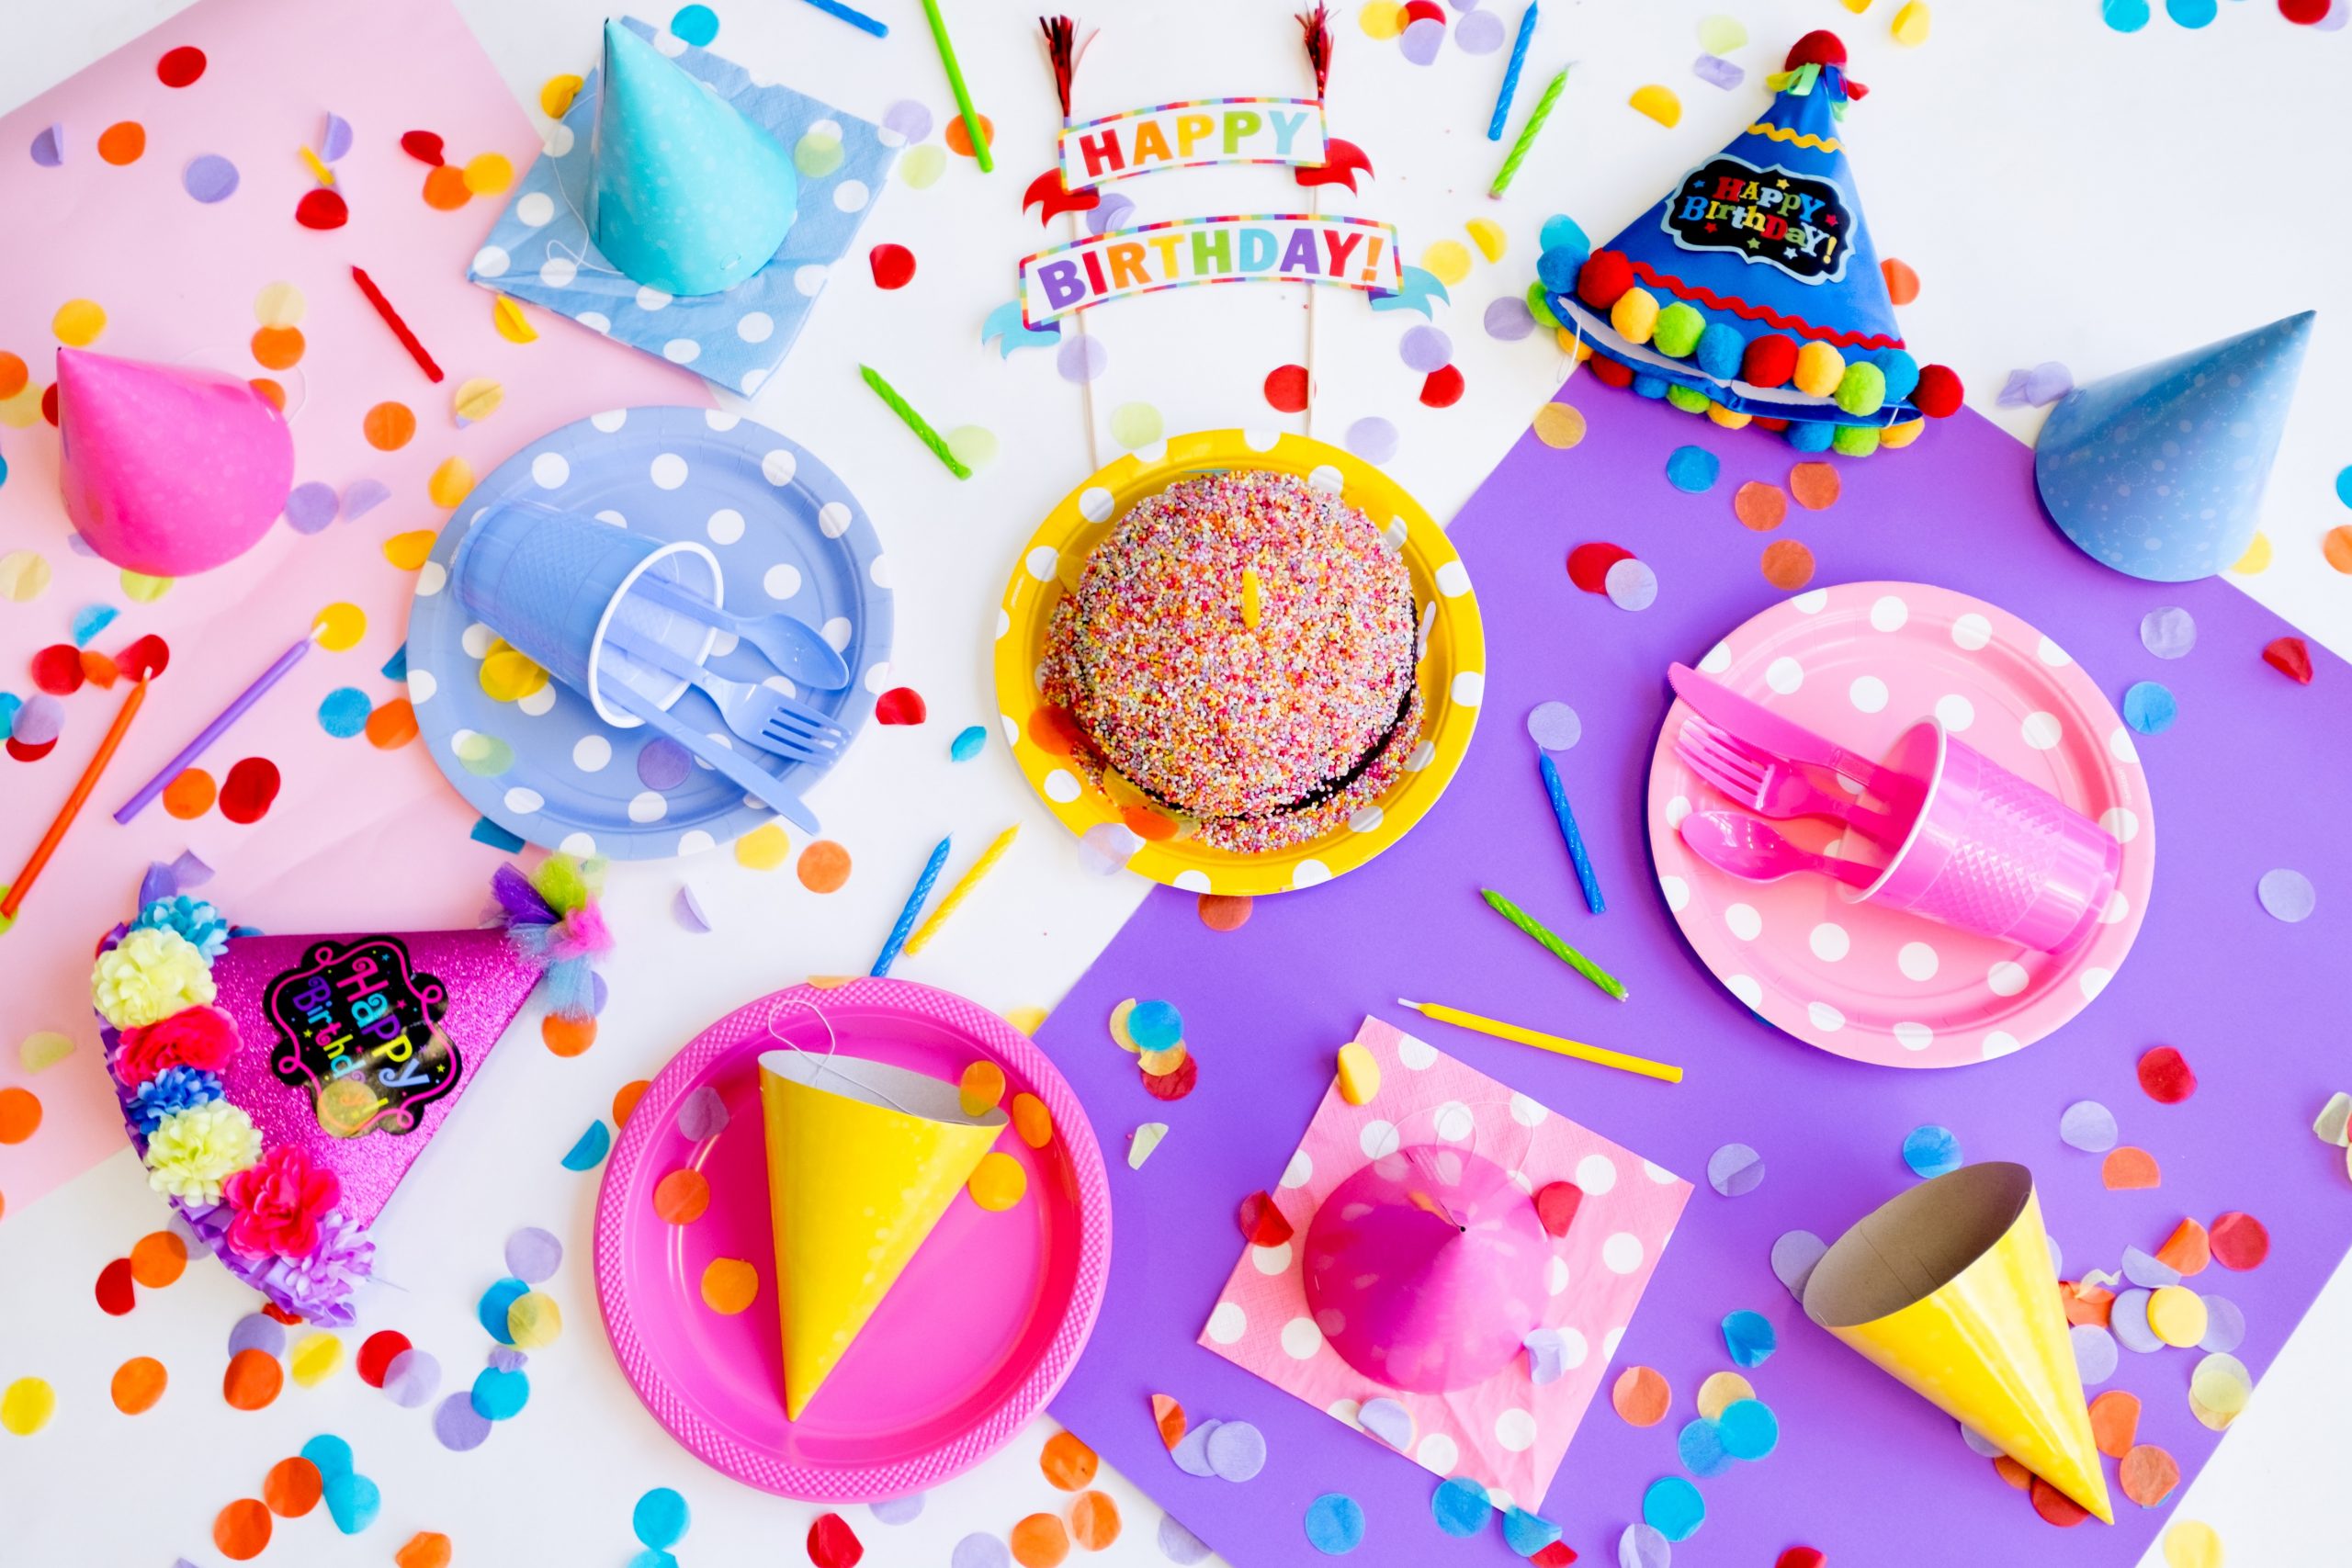 What’s the Best Theme for a Child’s Birthday Party?